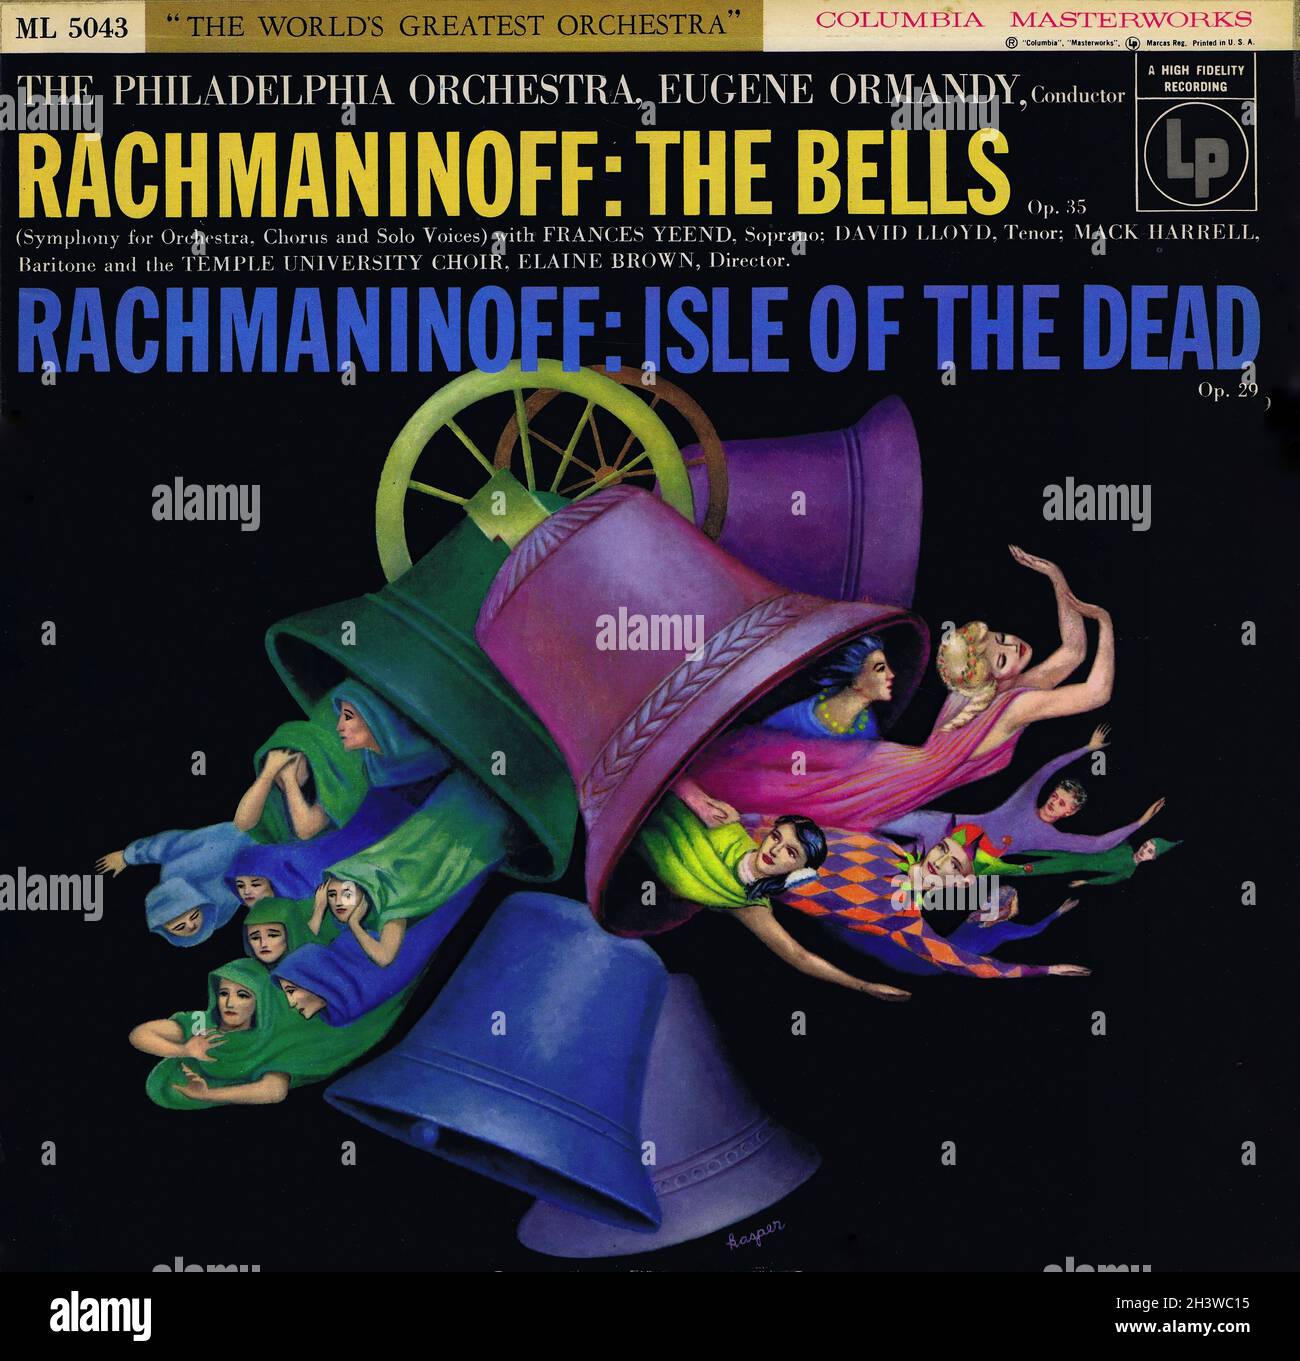 Rachmaninoff The Bells - Isle of the Dead - Ormandy Columbia - Classical Music Vintage Vinyl Record Stock Photo